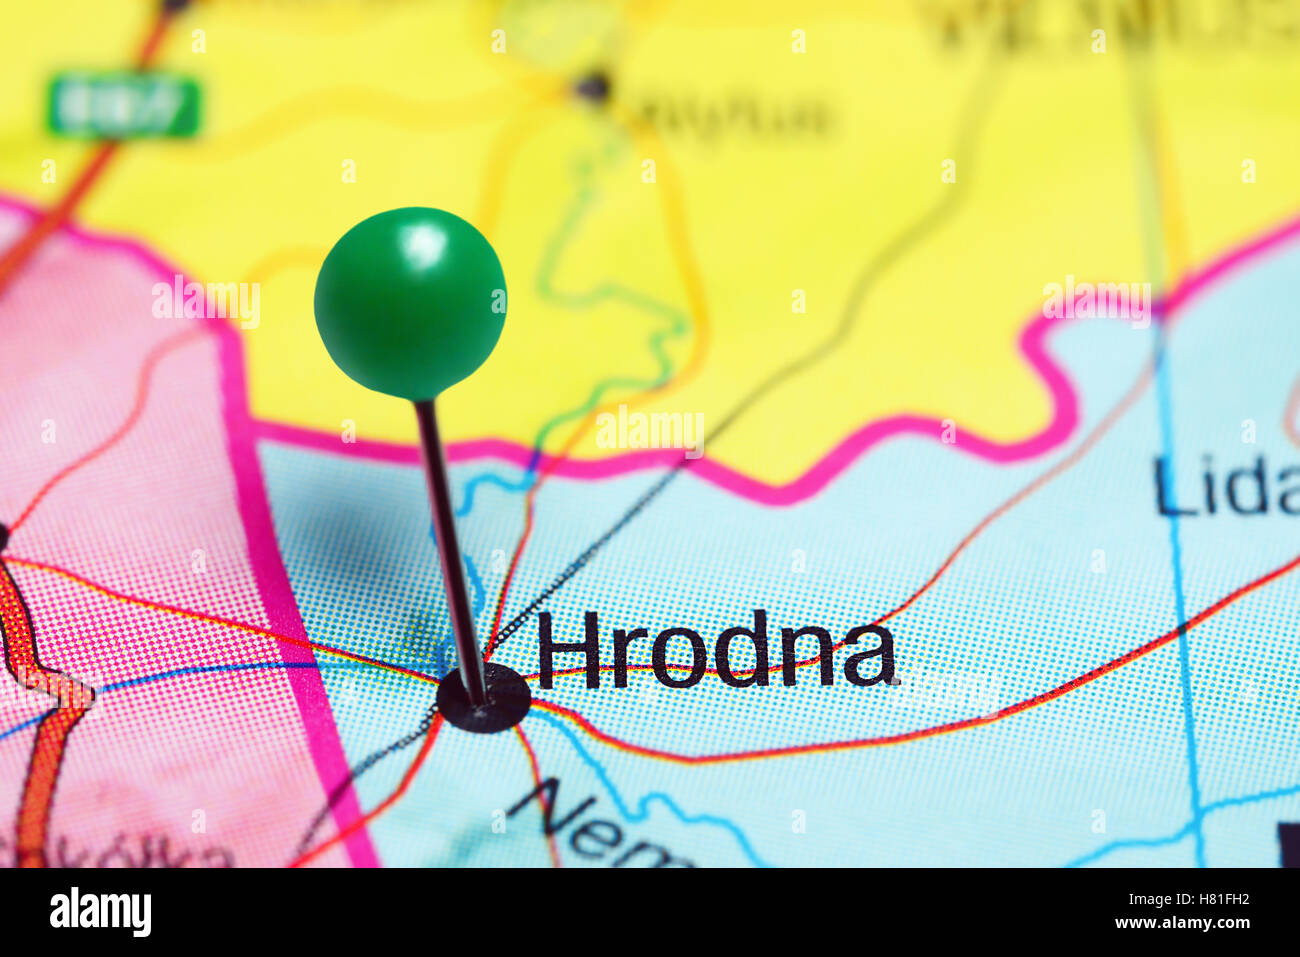 Hrodna pinned on a map of Belarus Stock Photo